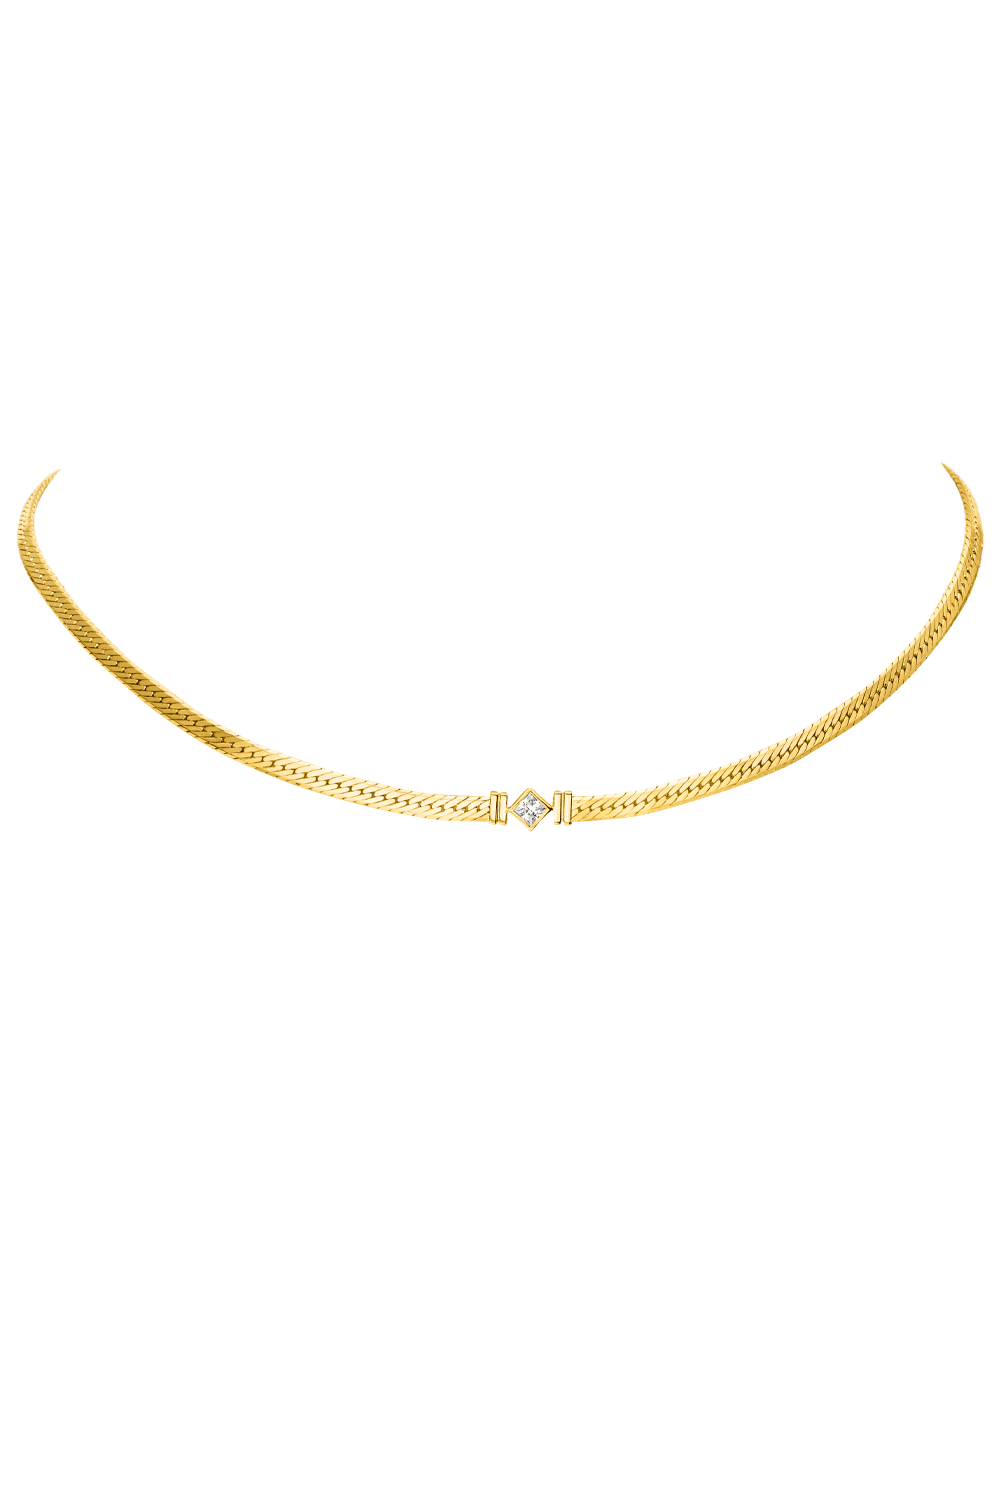 Retro Sparkling Necklace 18K Gold Plated